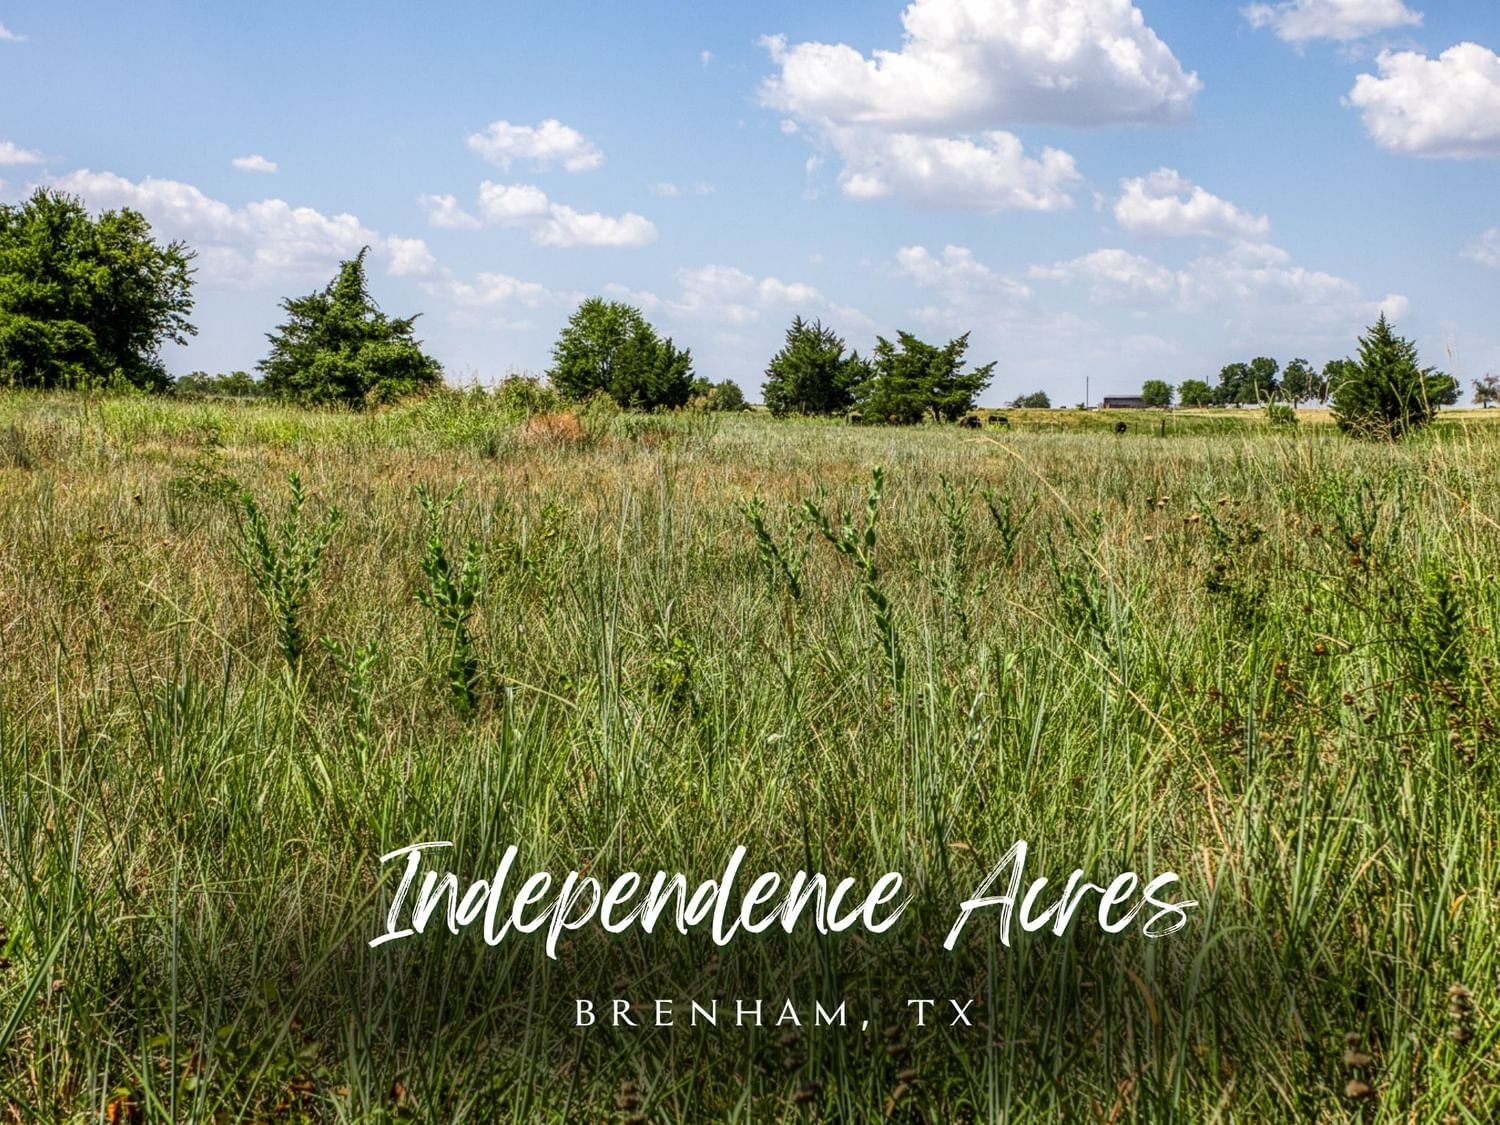 Real estate property located at 9500 Old Independence Road, Washington, A0078 - A0078 - Lessassier, Luke, Brenham, TX, US